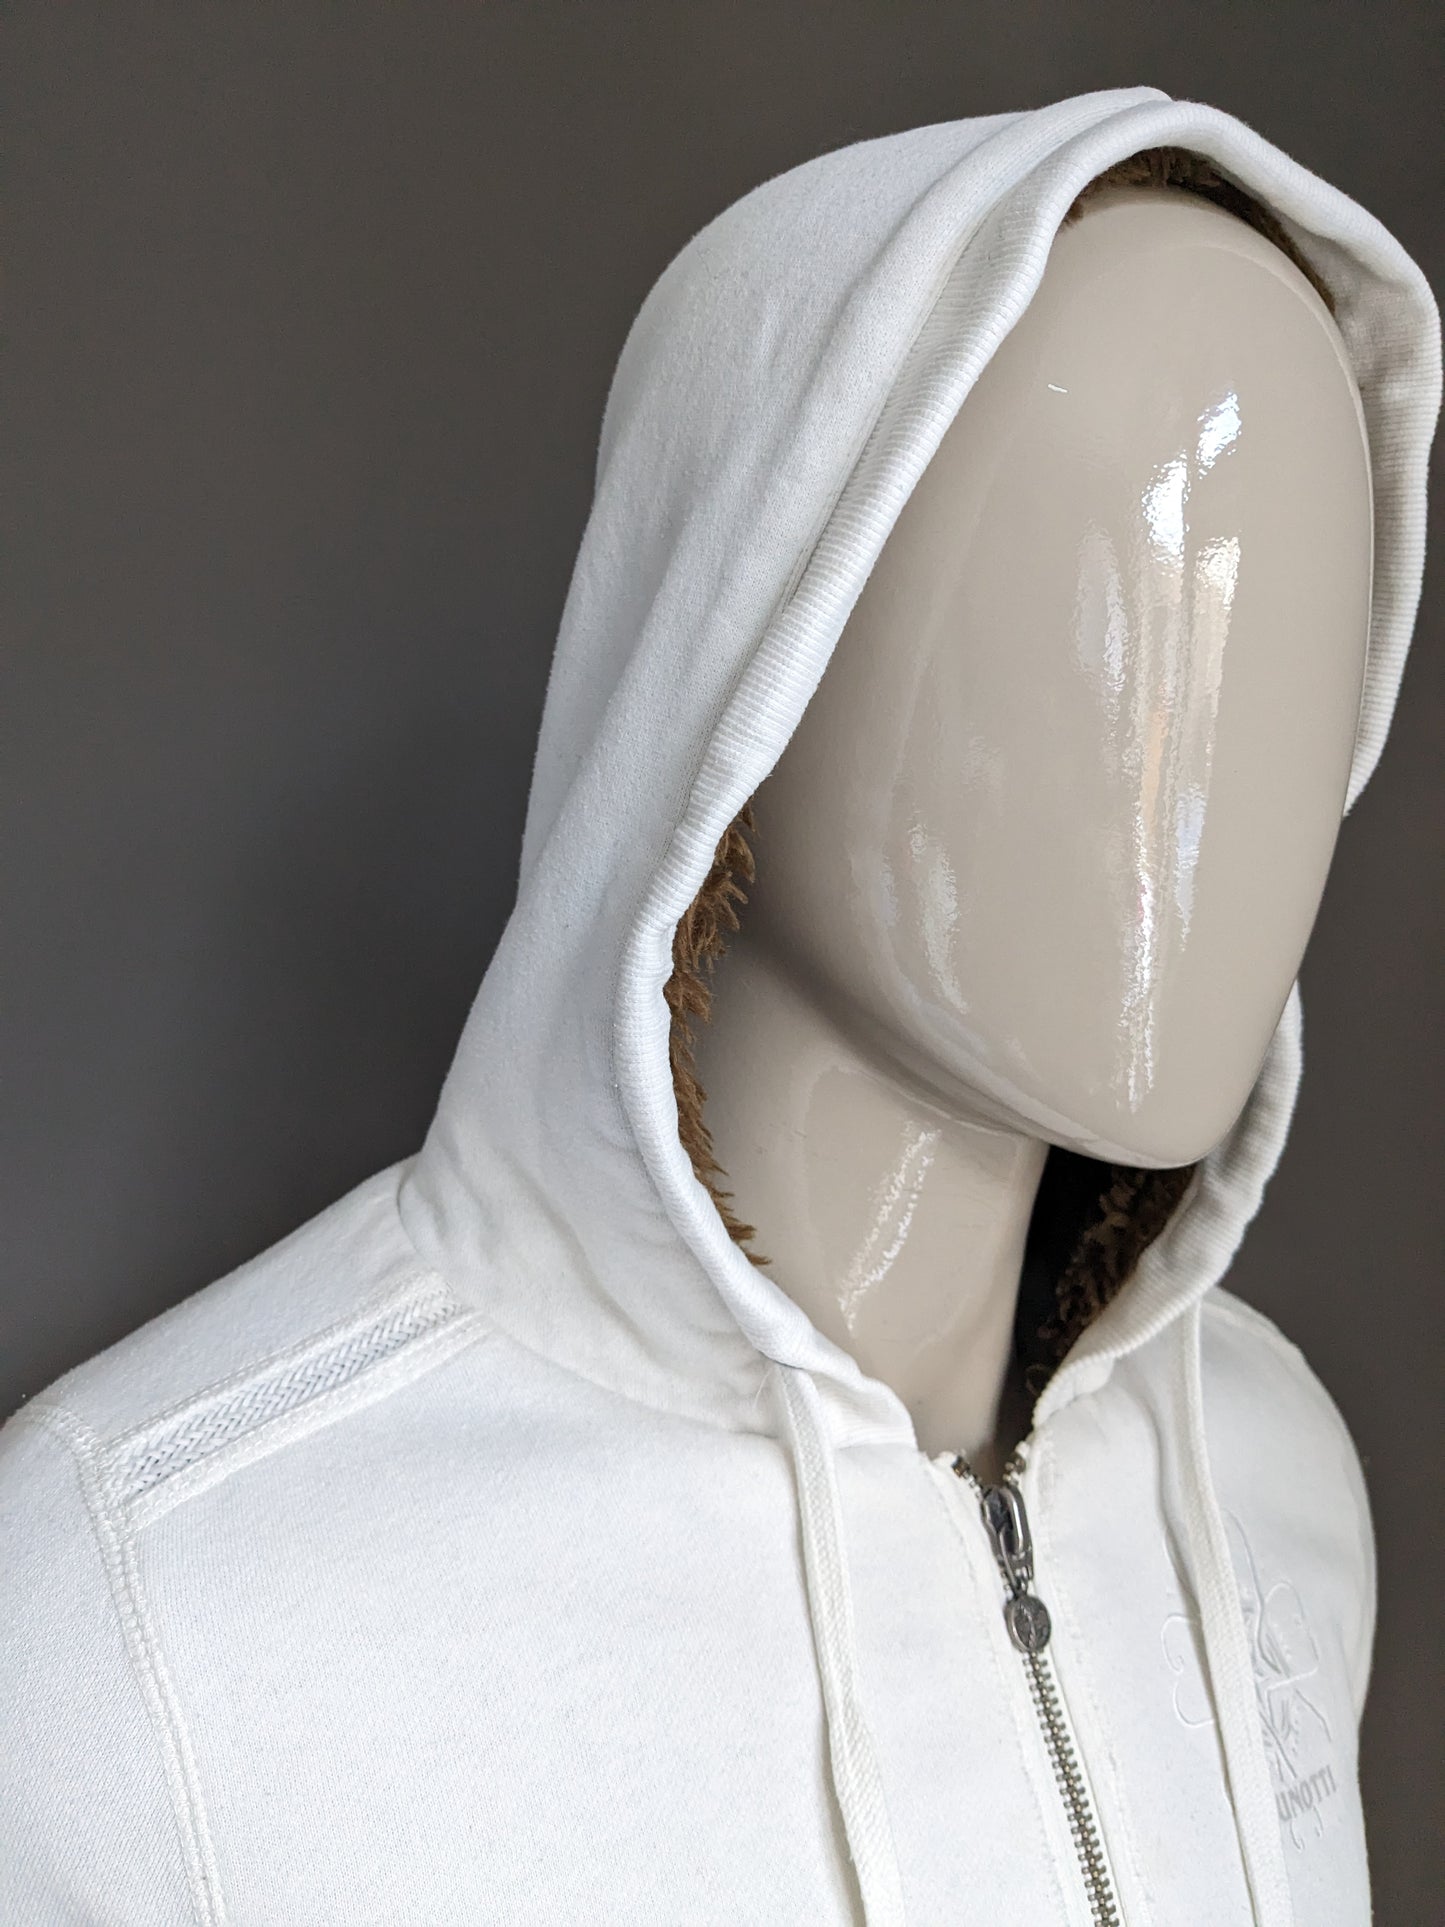 Brunotti thickly lined hot cardigan with hood. White. Size S.